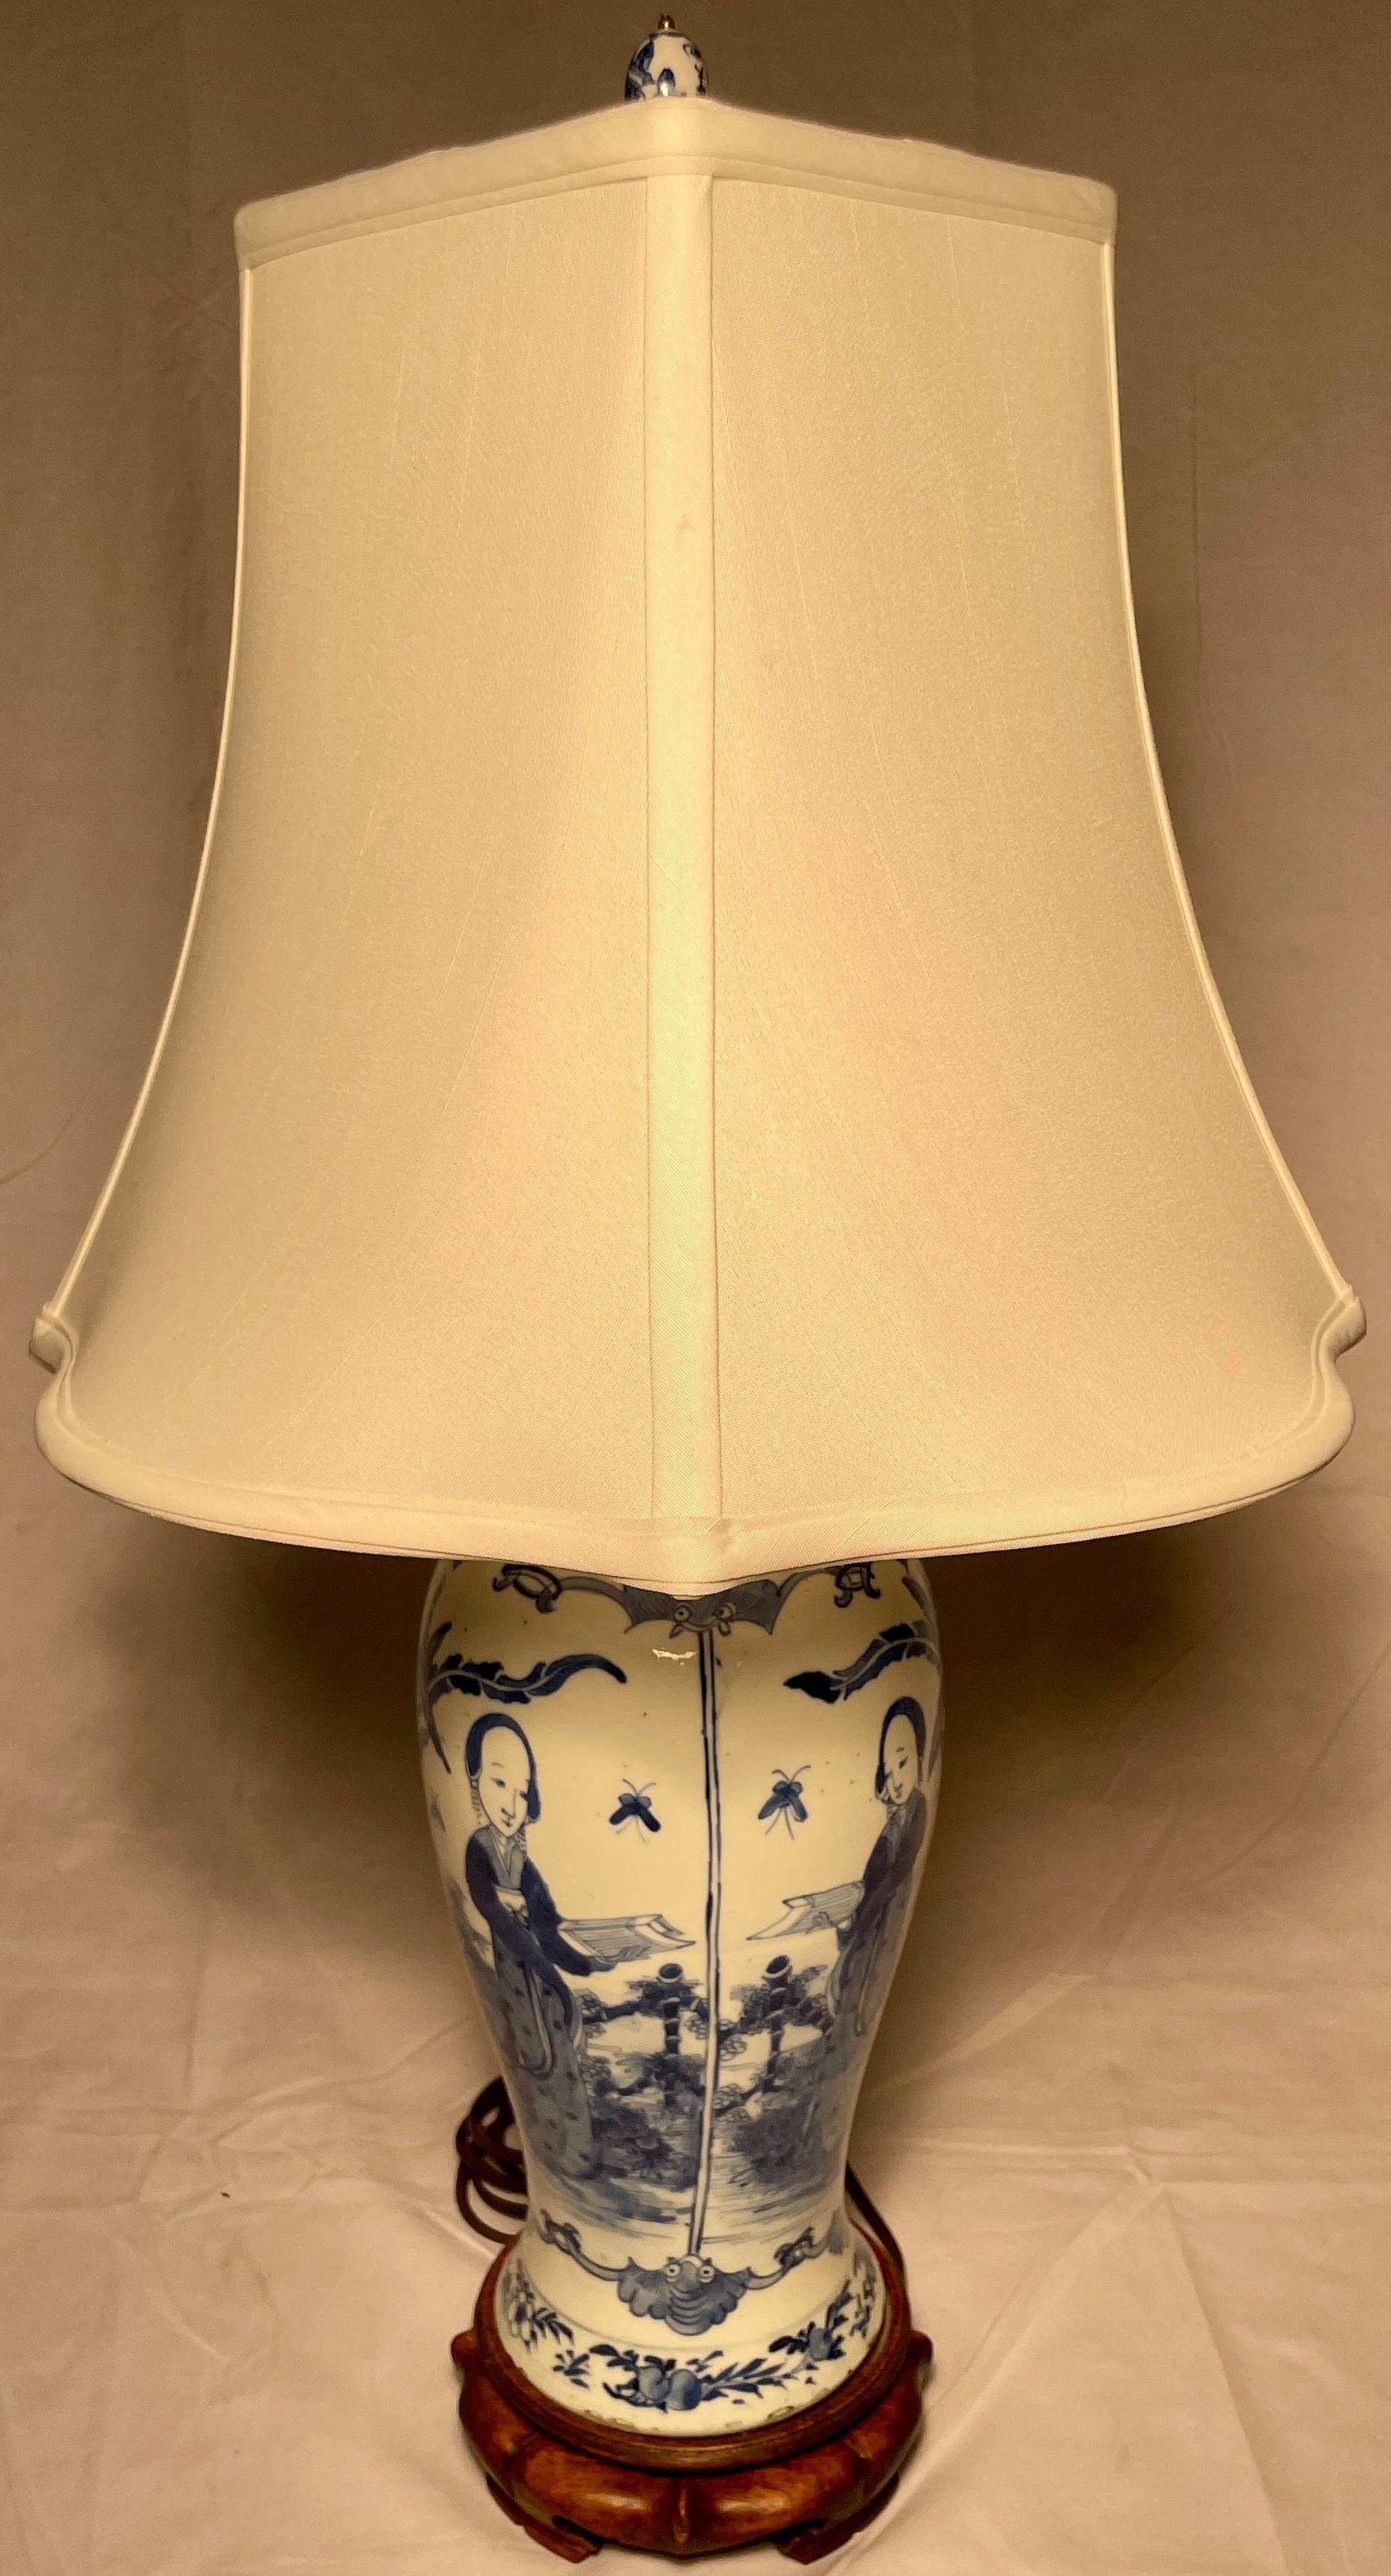 Antique early 20th century Chinese porcelain lamp.